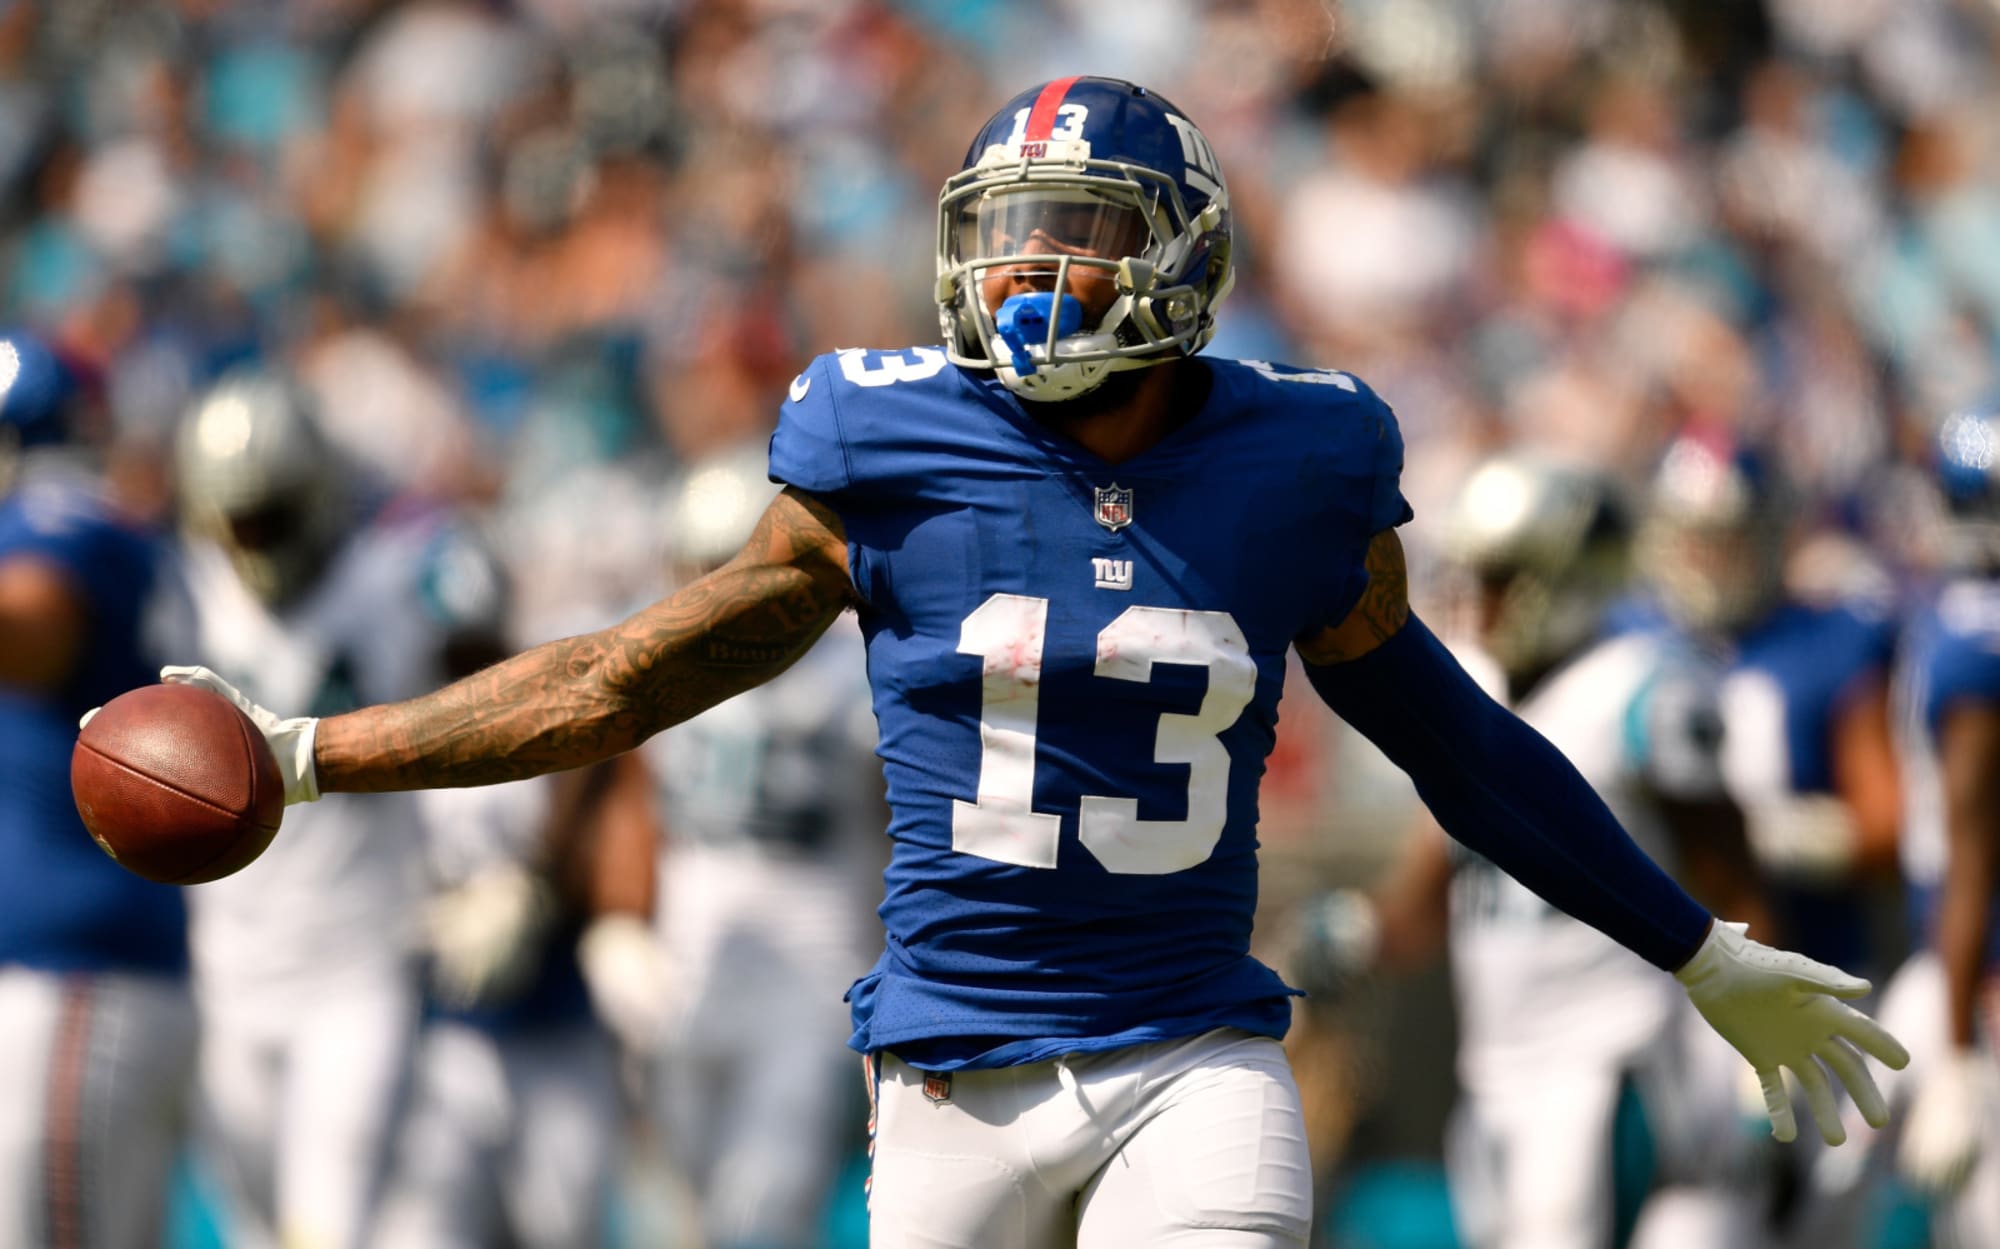 Reports: Giants Wide Receiver Odell Beckham Jr. Traded to Browns